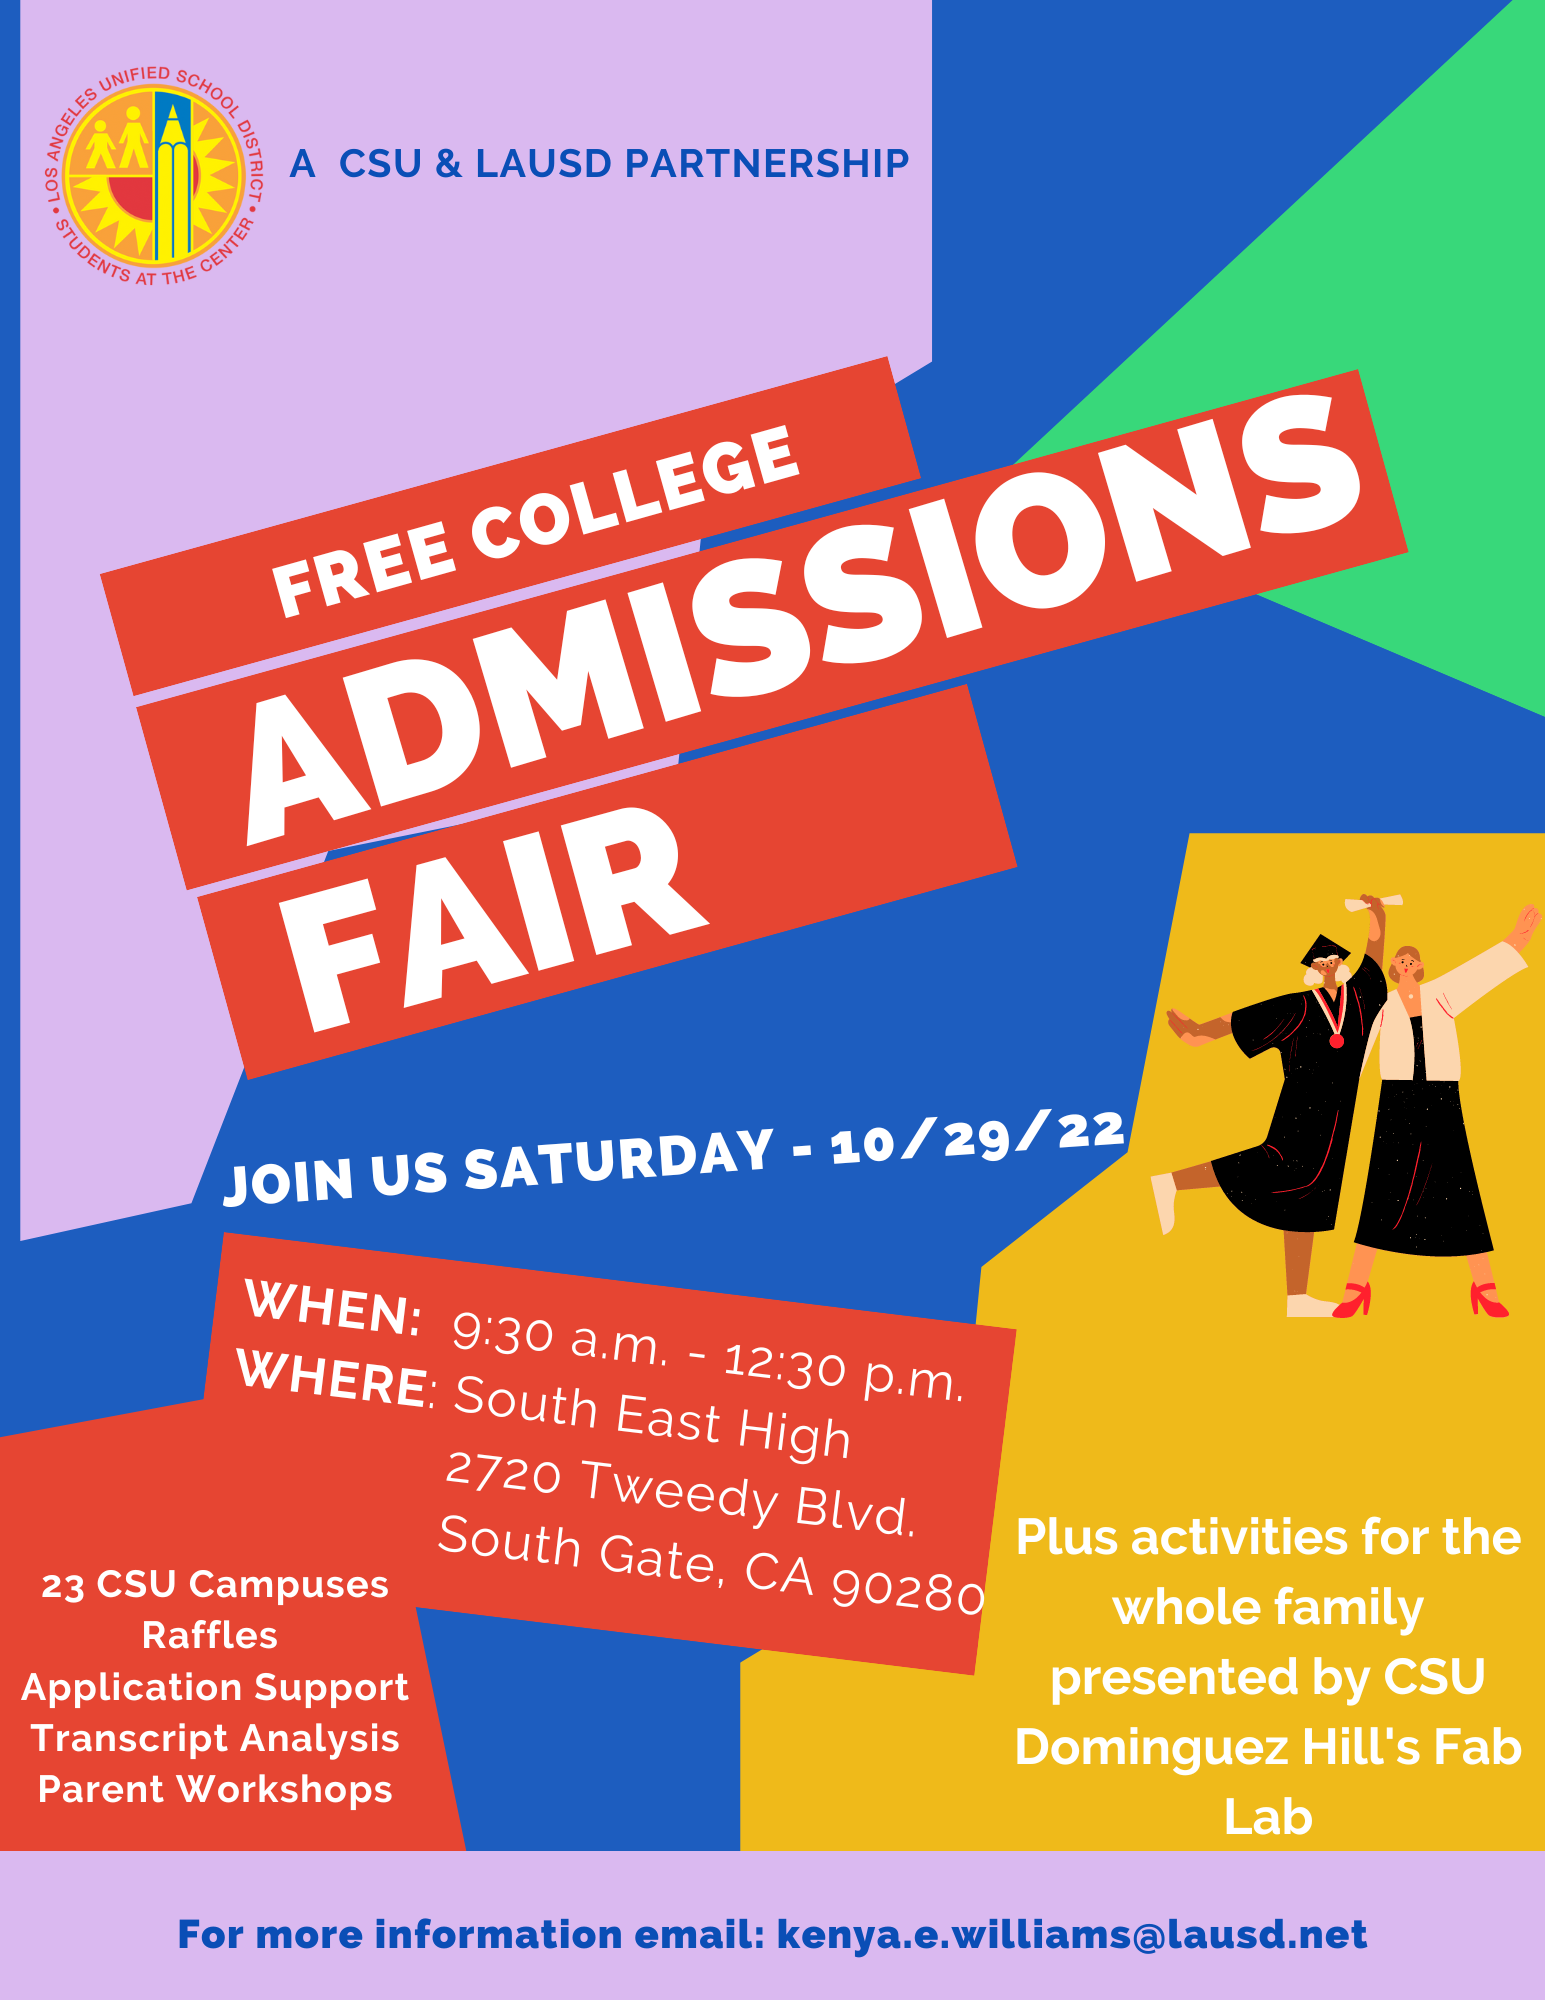 Free College Fair Flyer in English